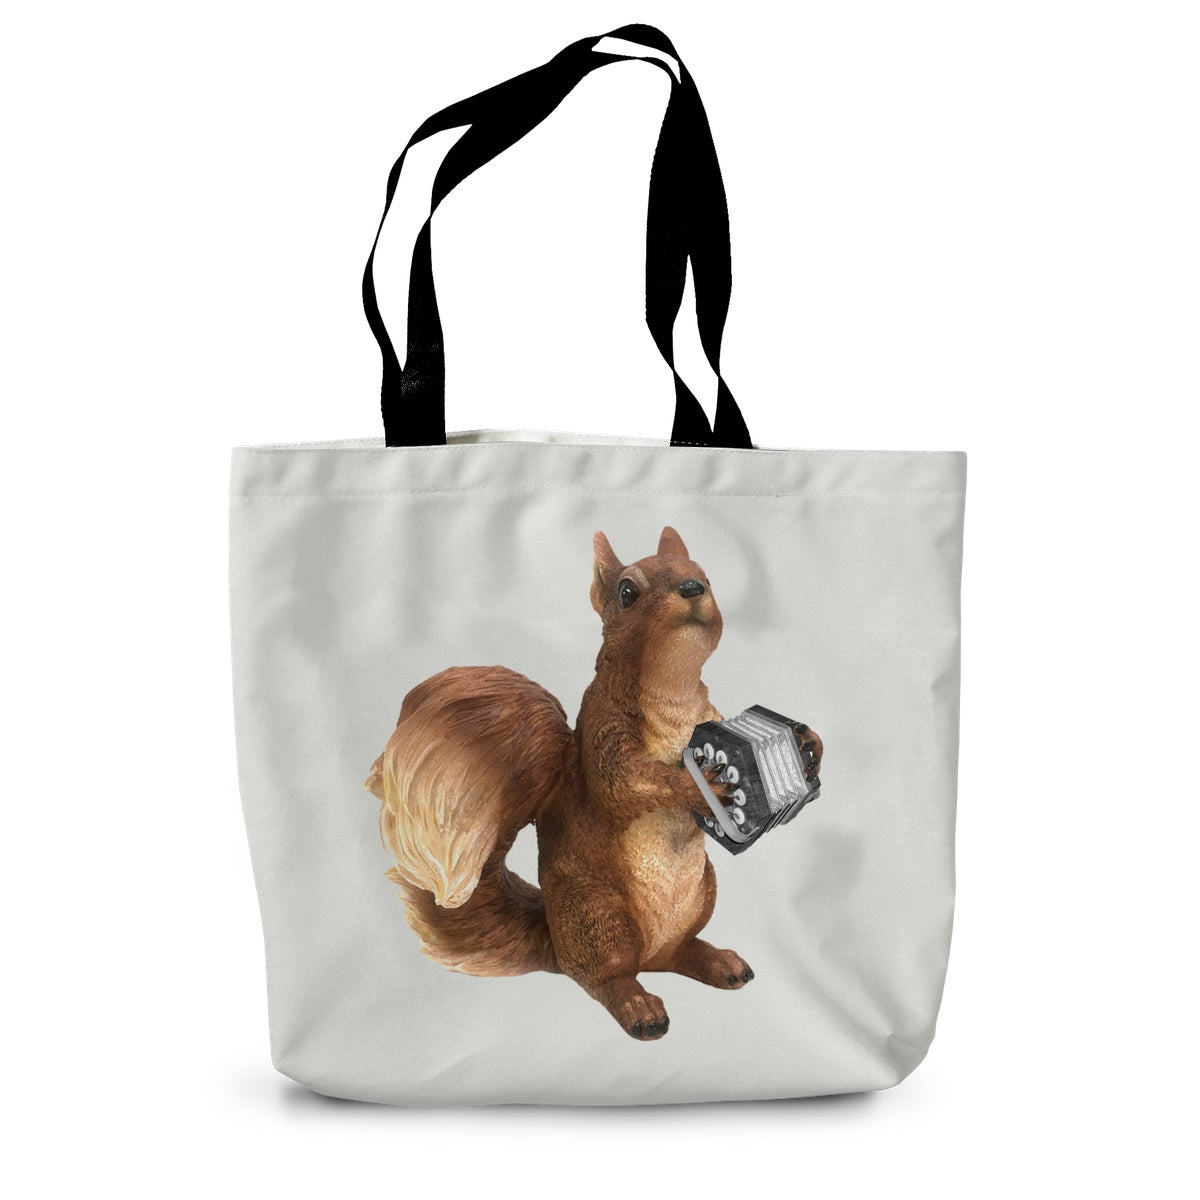 Concertina Playing Squirrel Canvas Tote Bag